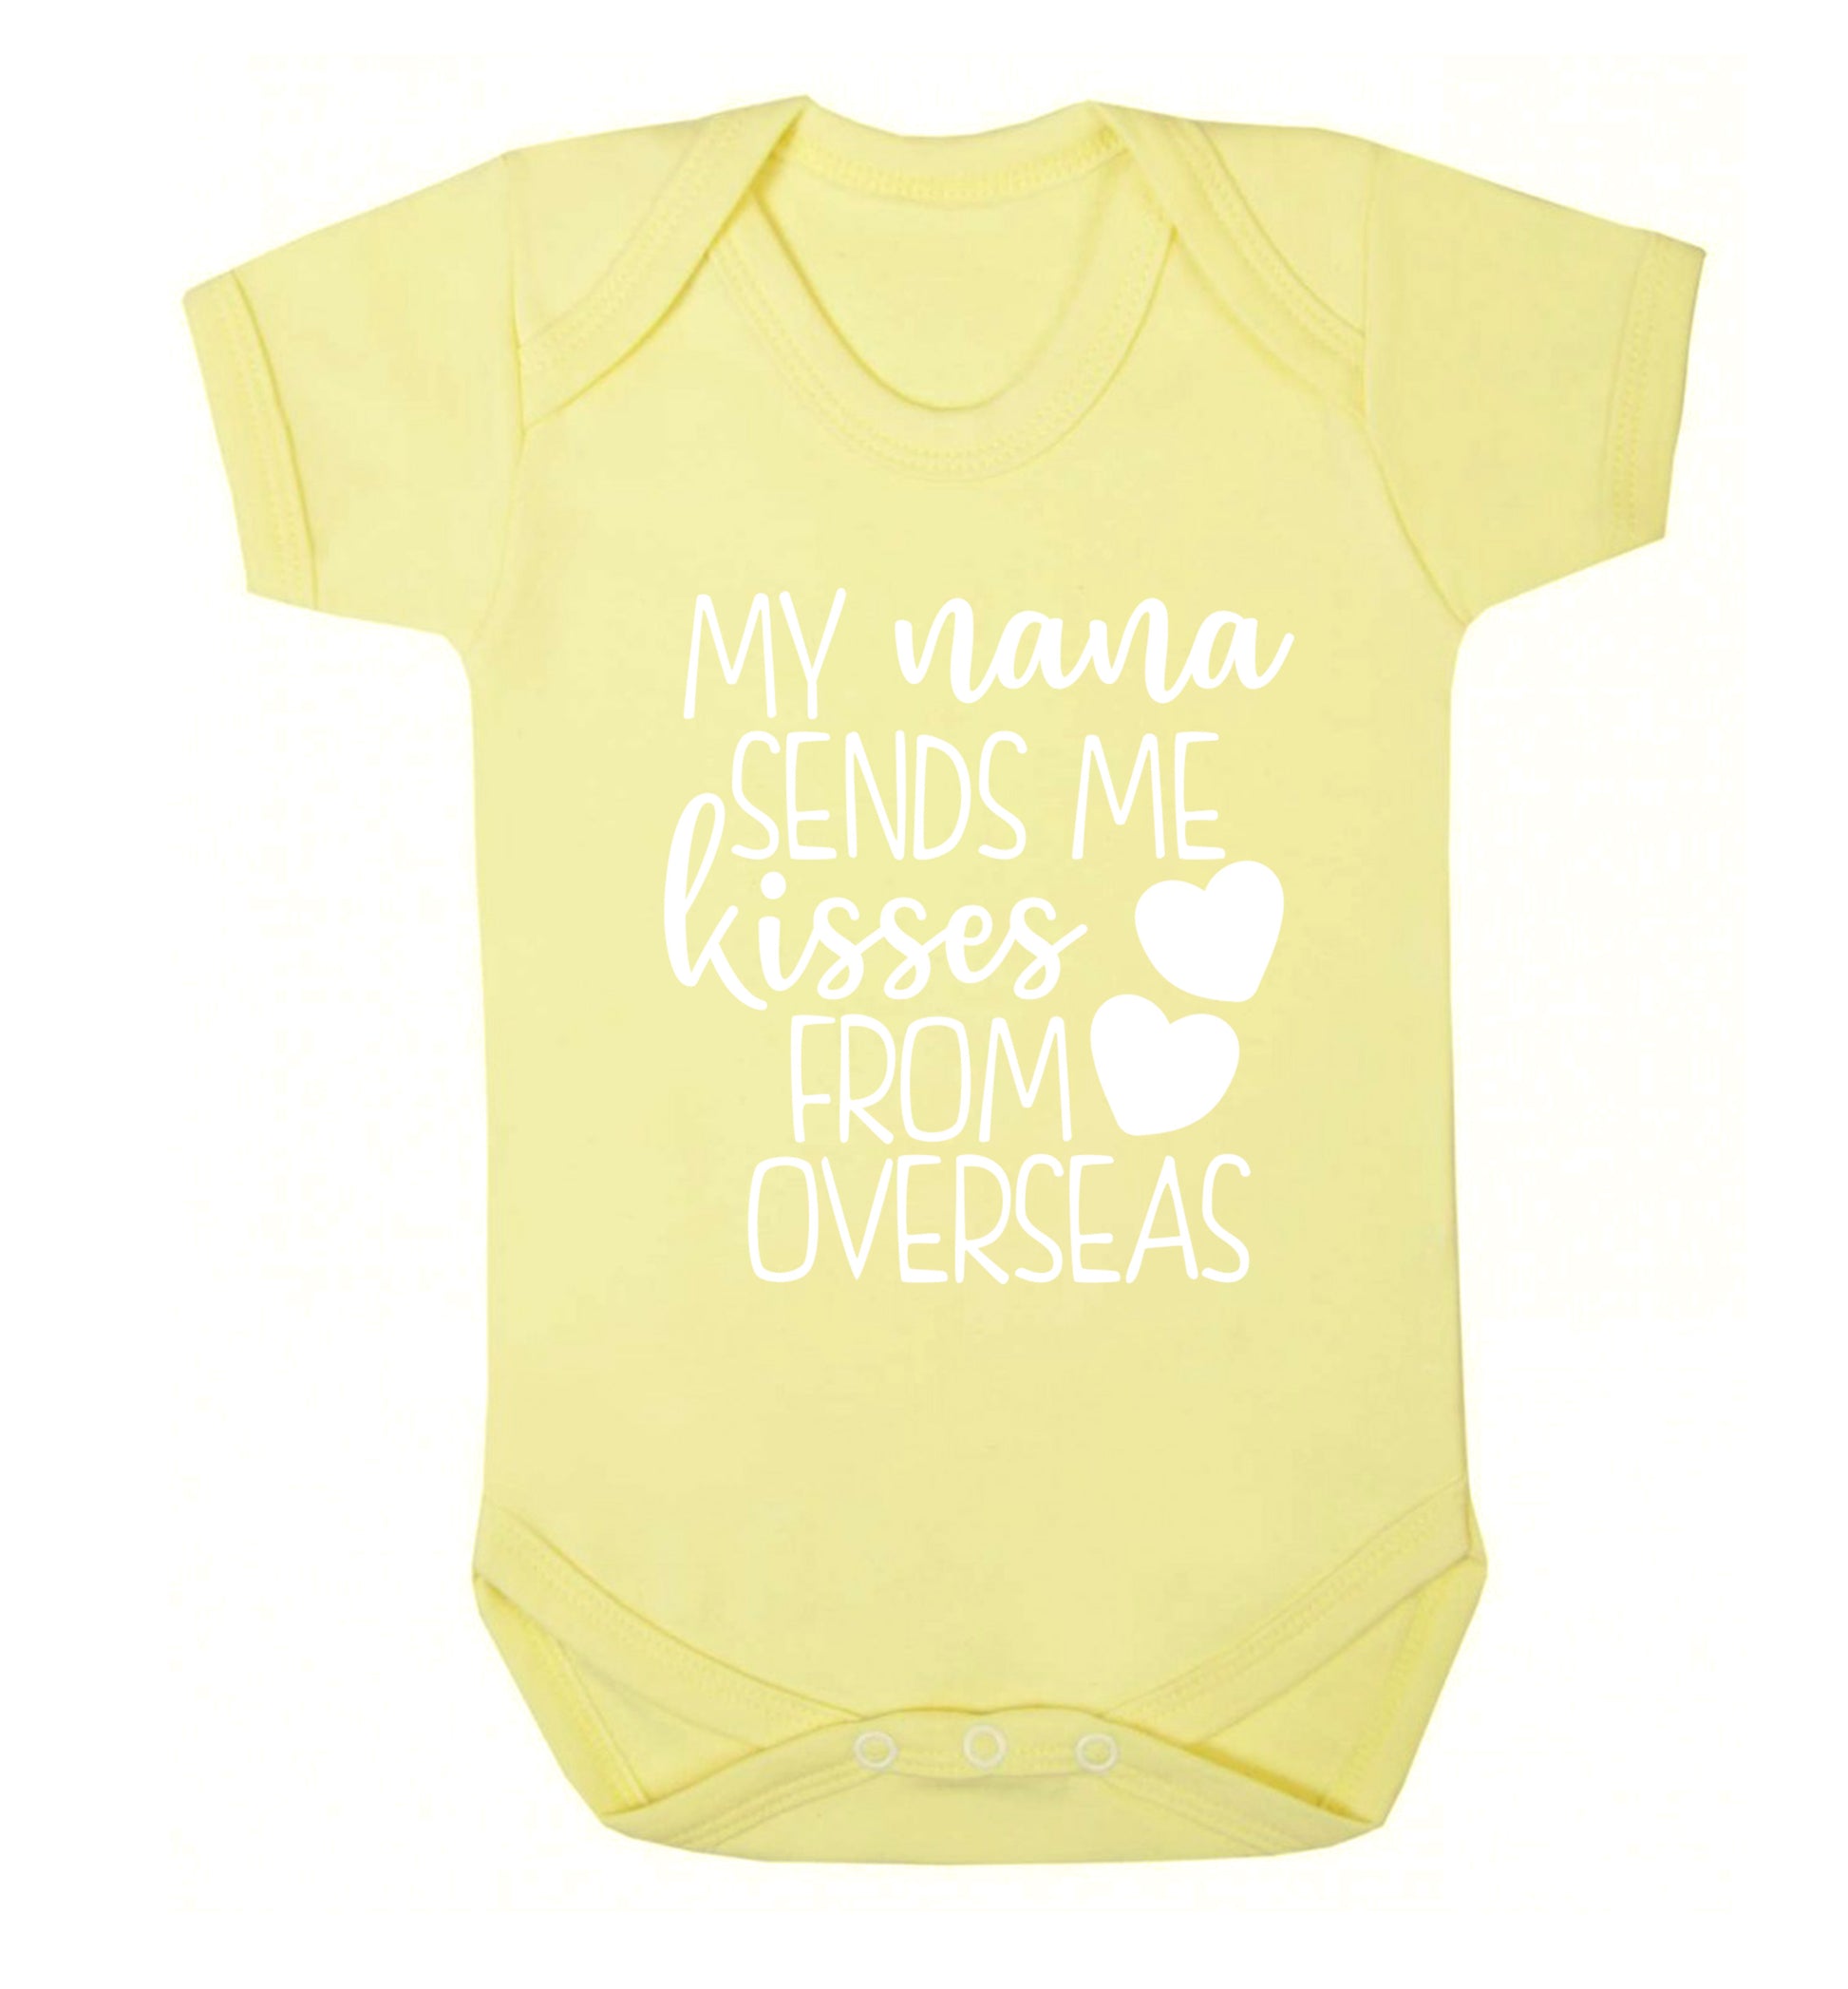 My nana sends me kisses from overseas Baby Vest pale yellow 18-24 months